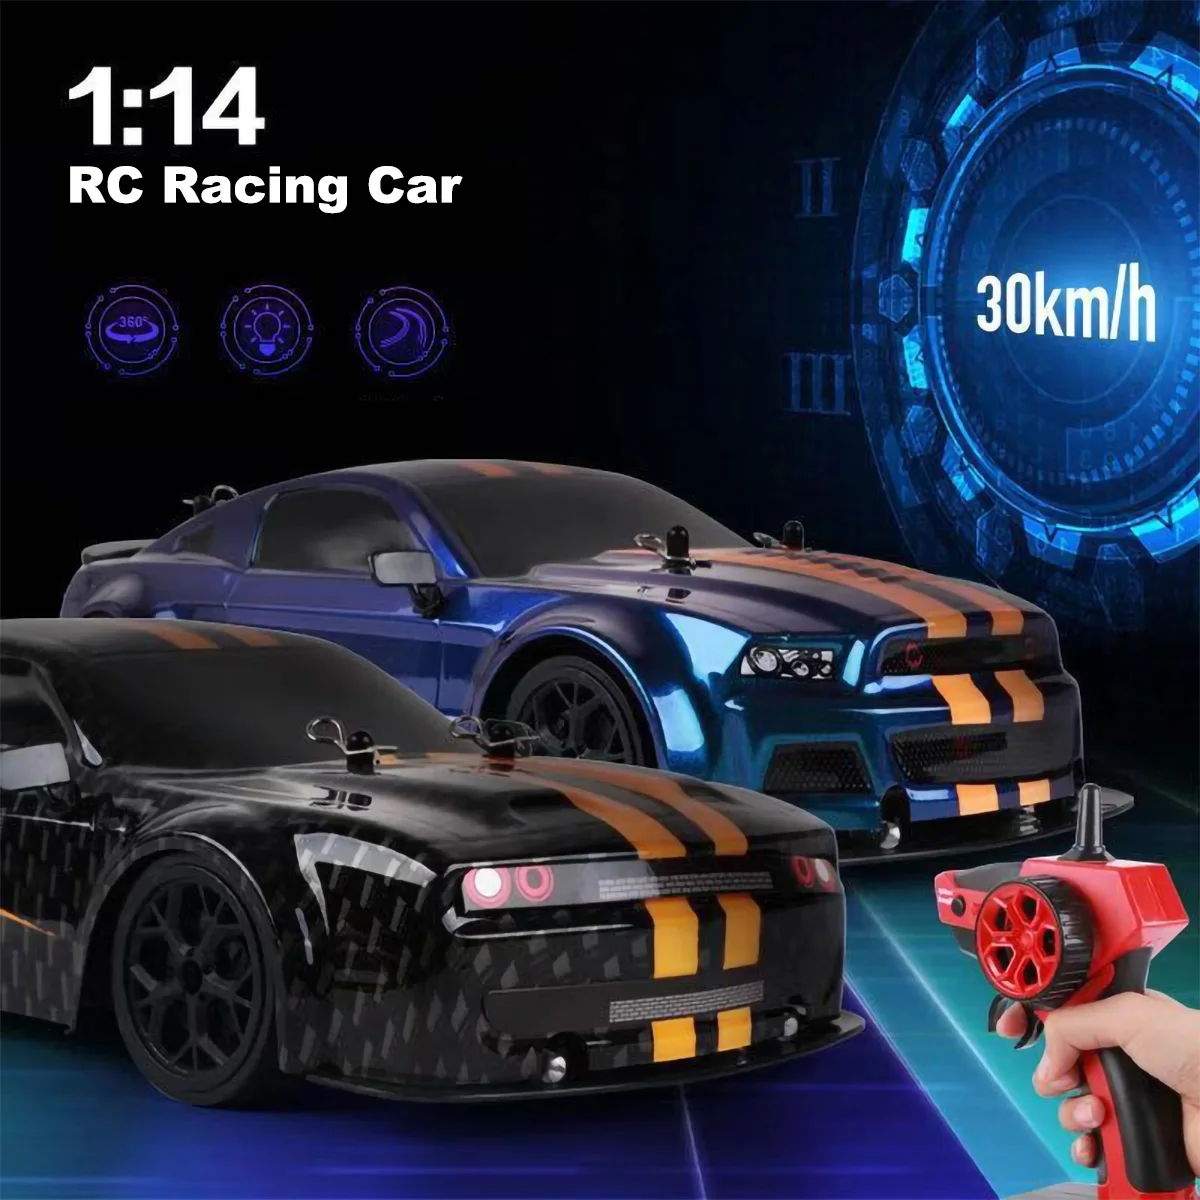 1:14 Scale RC Racing Car Toy Charger Mustang Sportcar Max 30KM/h High Sp... - £40.99 GBP